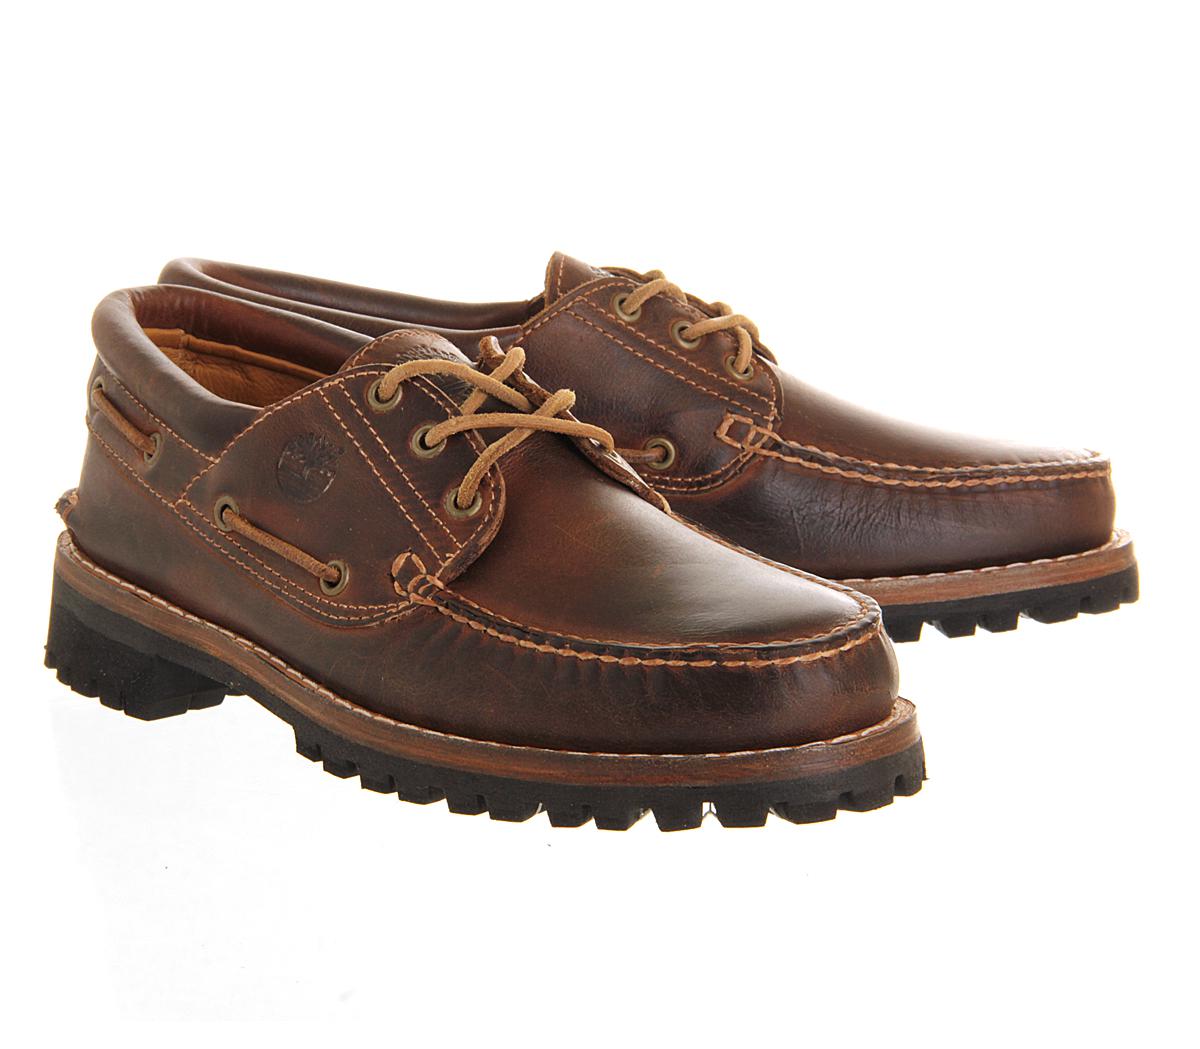 Lyst - Timberland Heritage 3 Eye Boat Shoe in Brown for Men